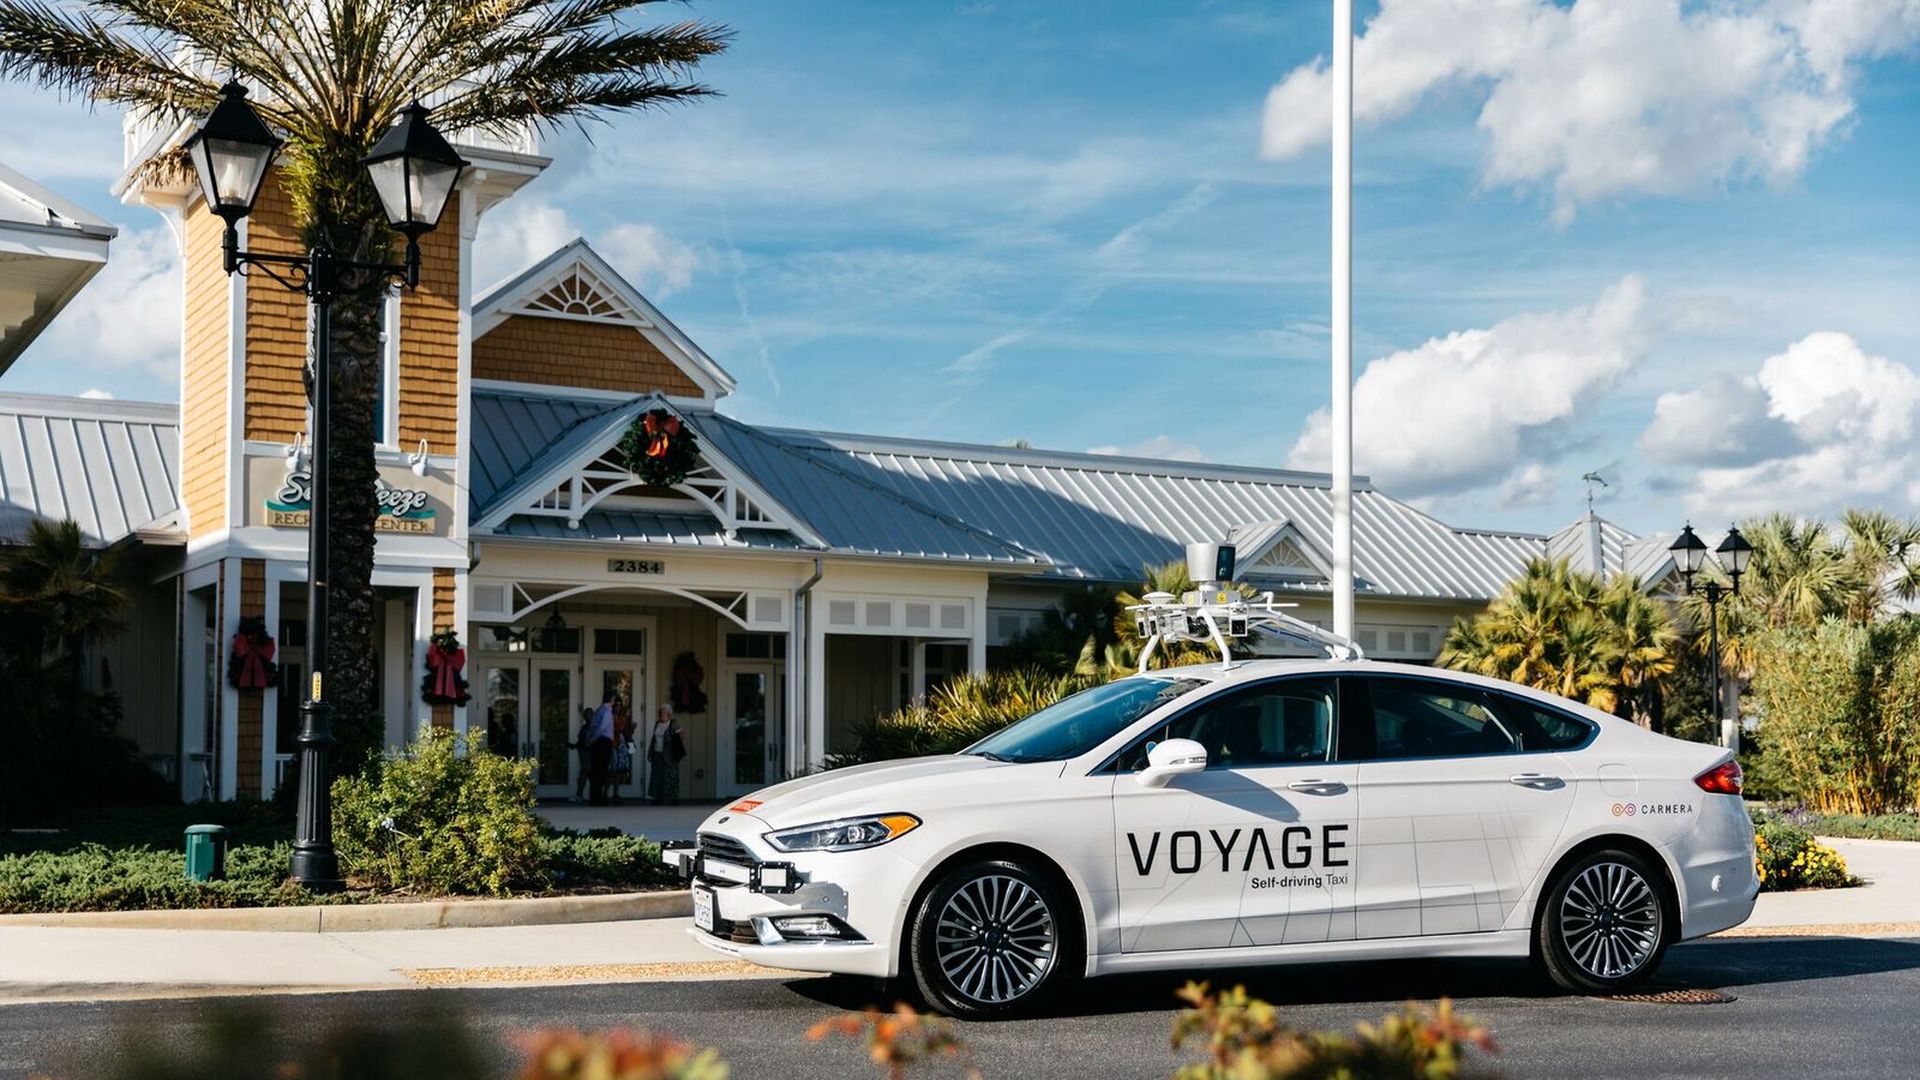 Voyage low-speed AV parked in a Florida retirement community